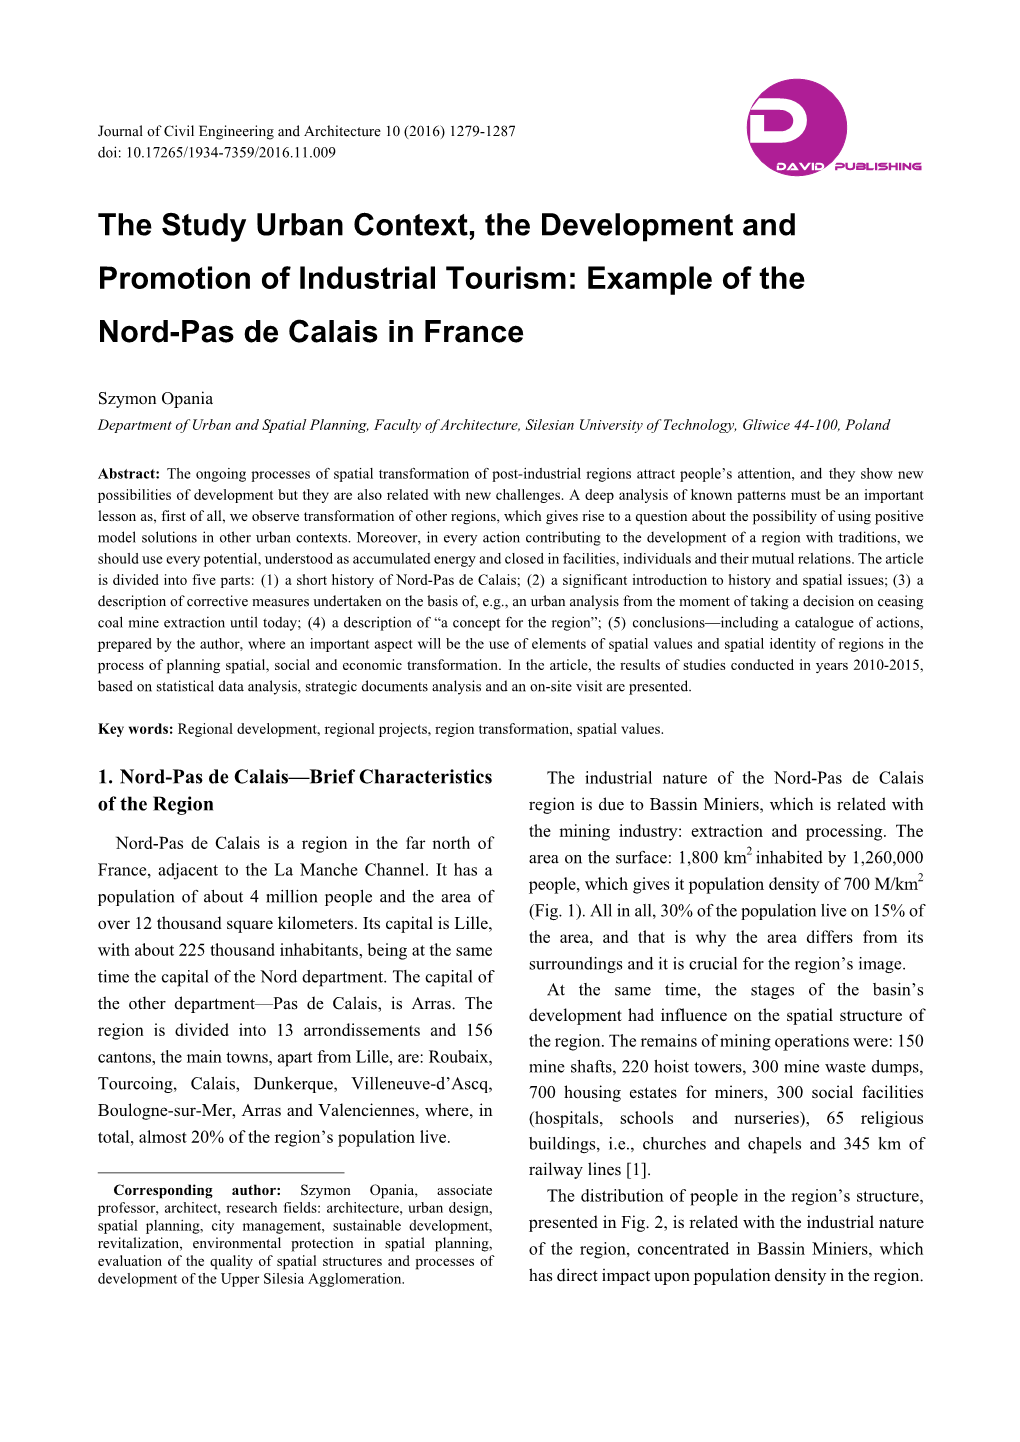 The Study Urban Context, the Development and Promotion of Industrial Tourism: Example of the Nord-Pas De Calais in France